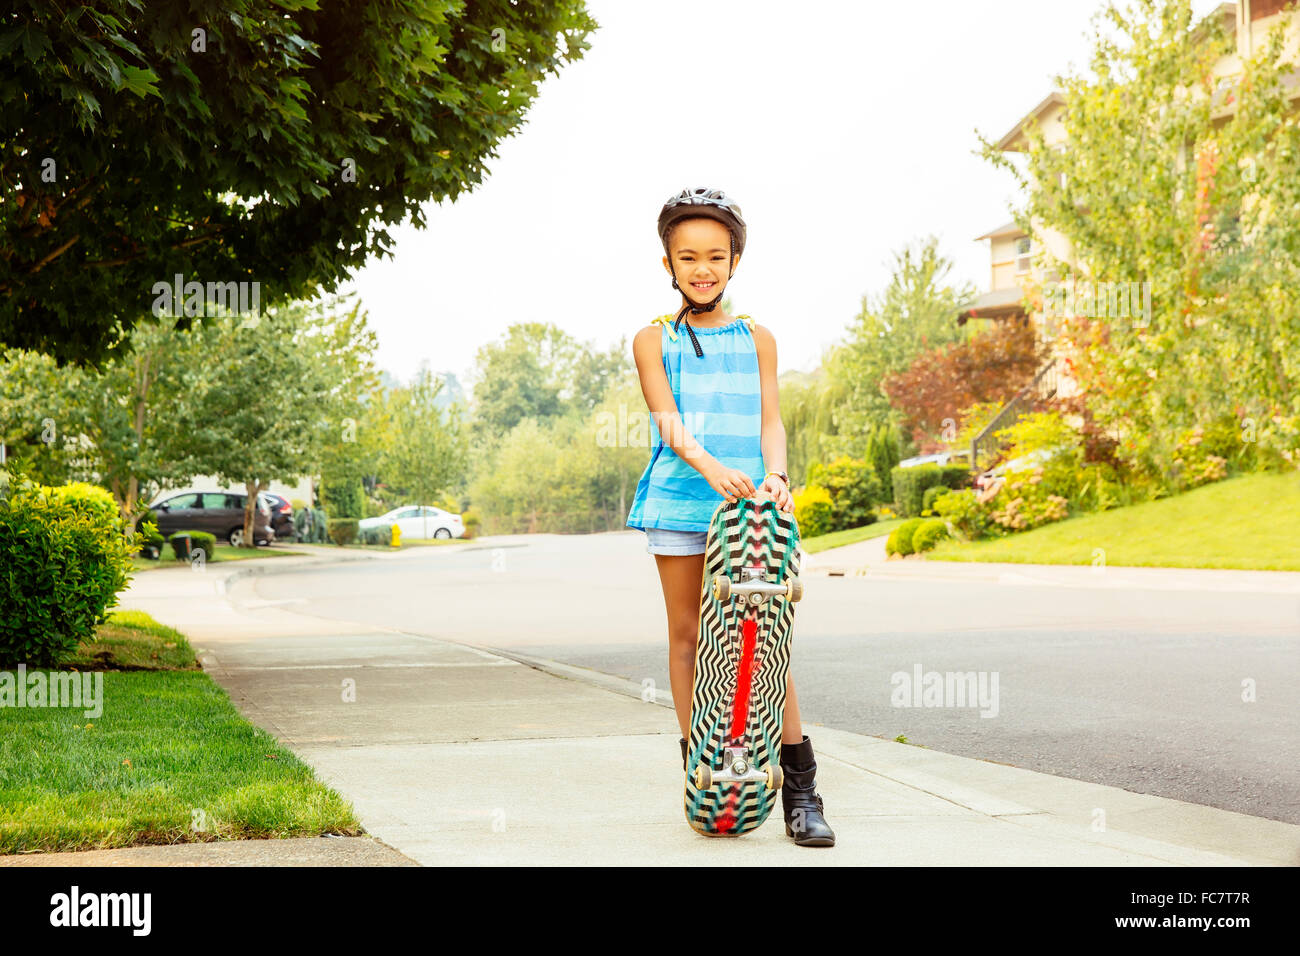 Mixed Race girl riding skateboard on sidewalk Banque D'Images